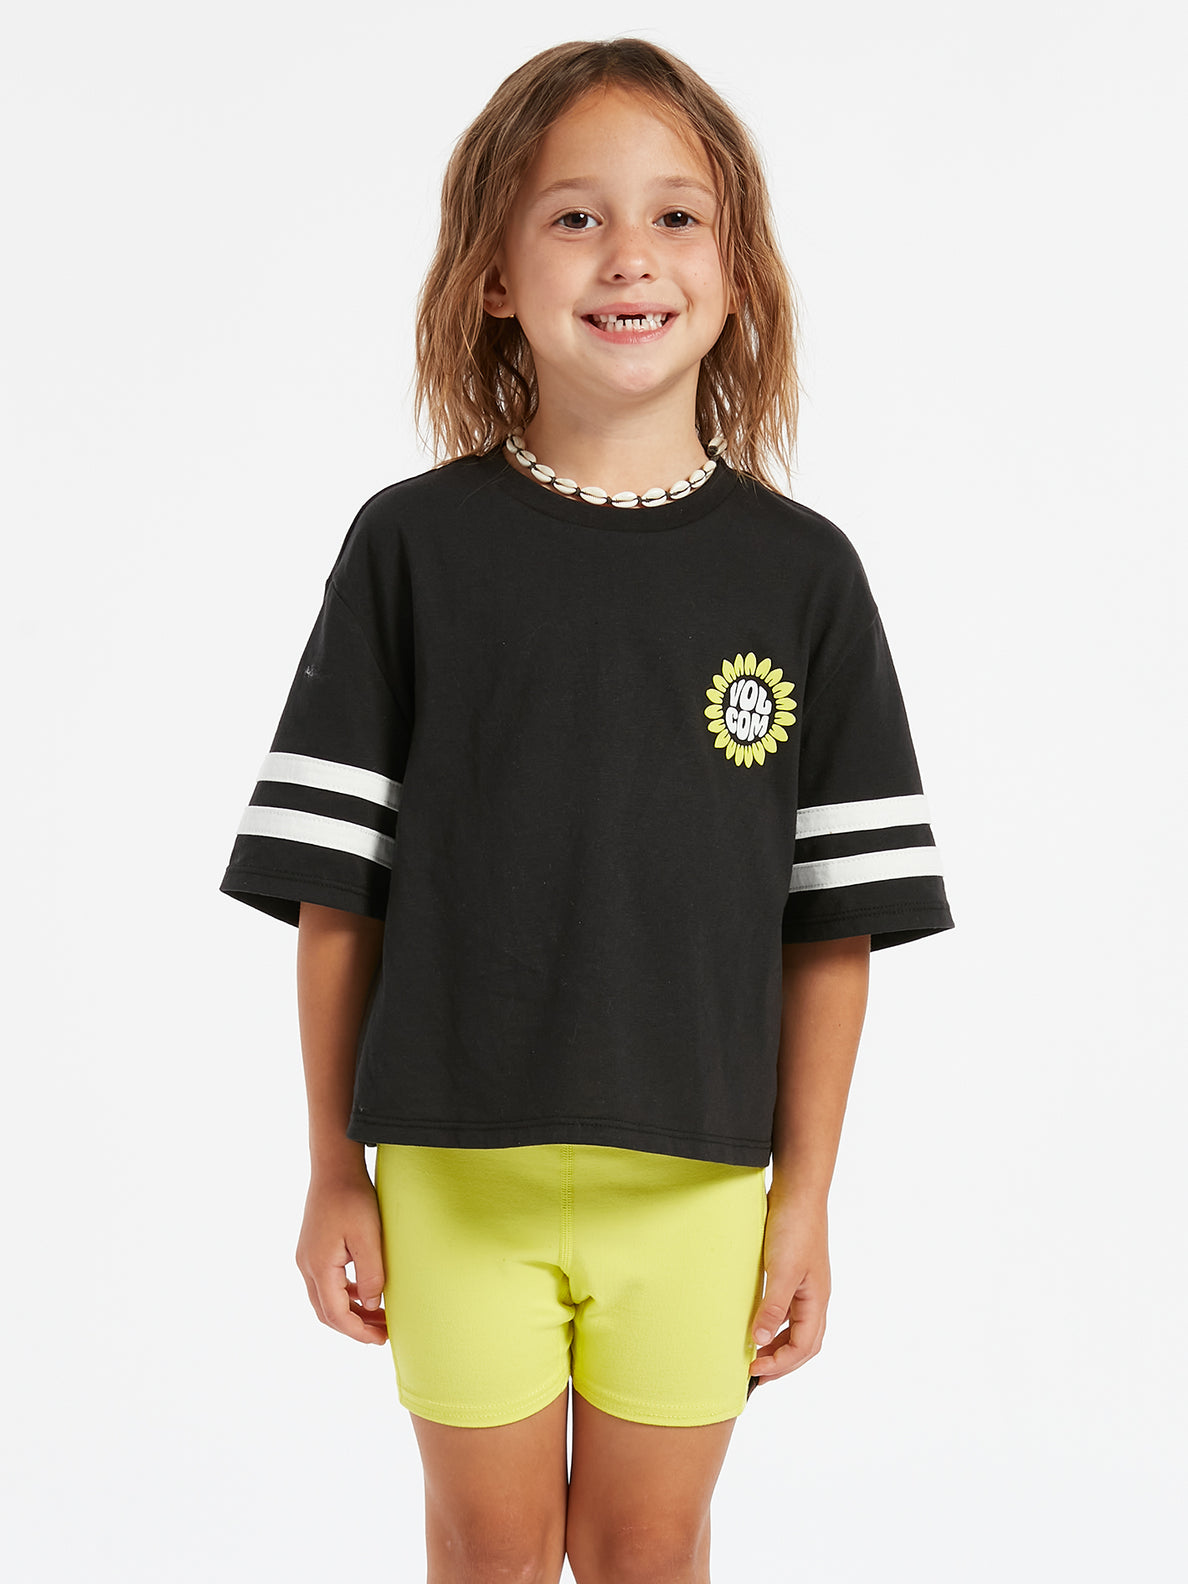 Girls Truly Stoked Tee - Black (R3522201_BLK) [F]